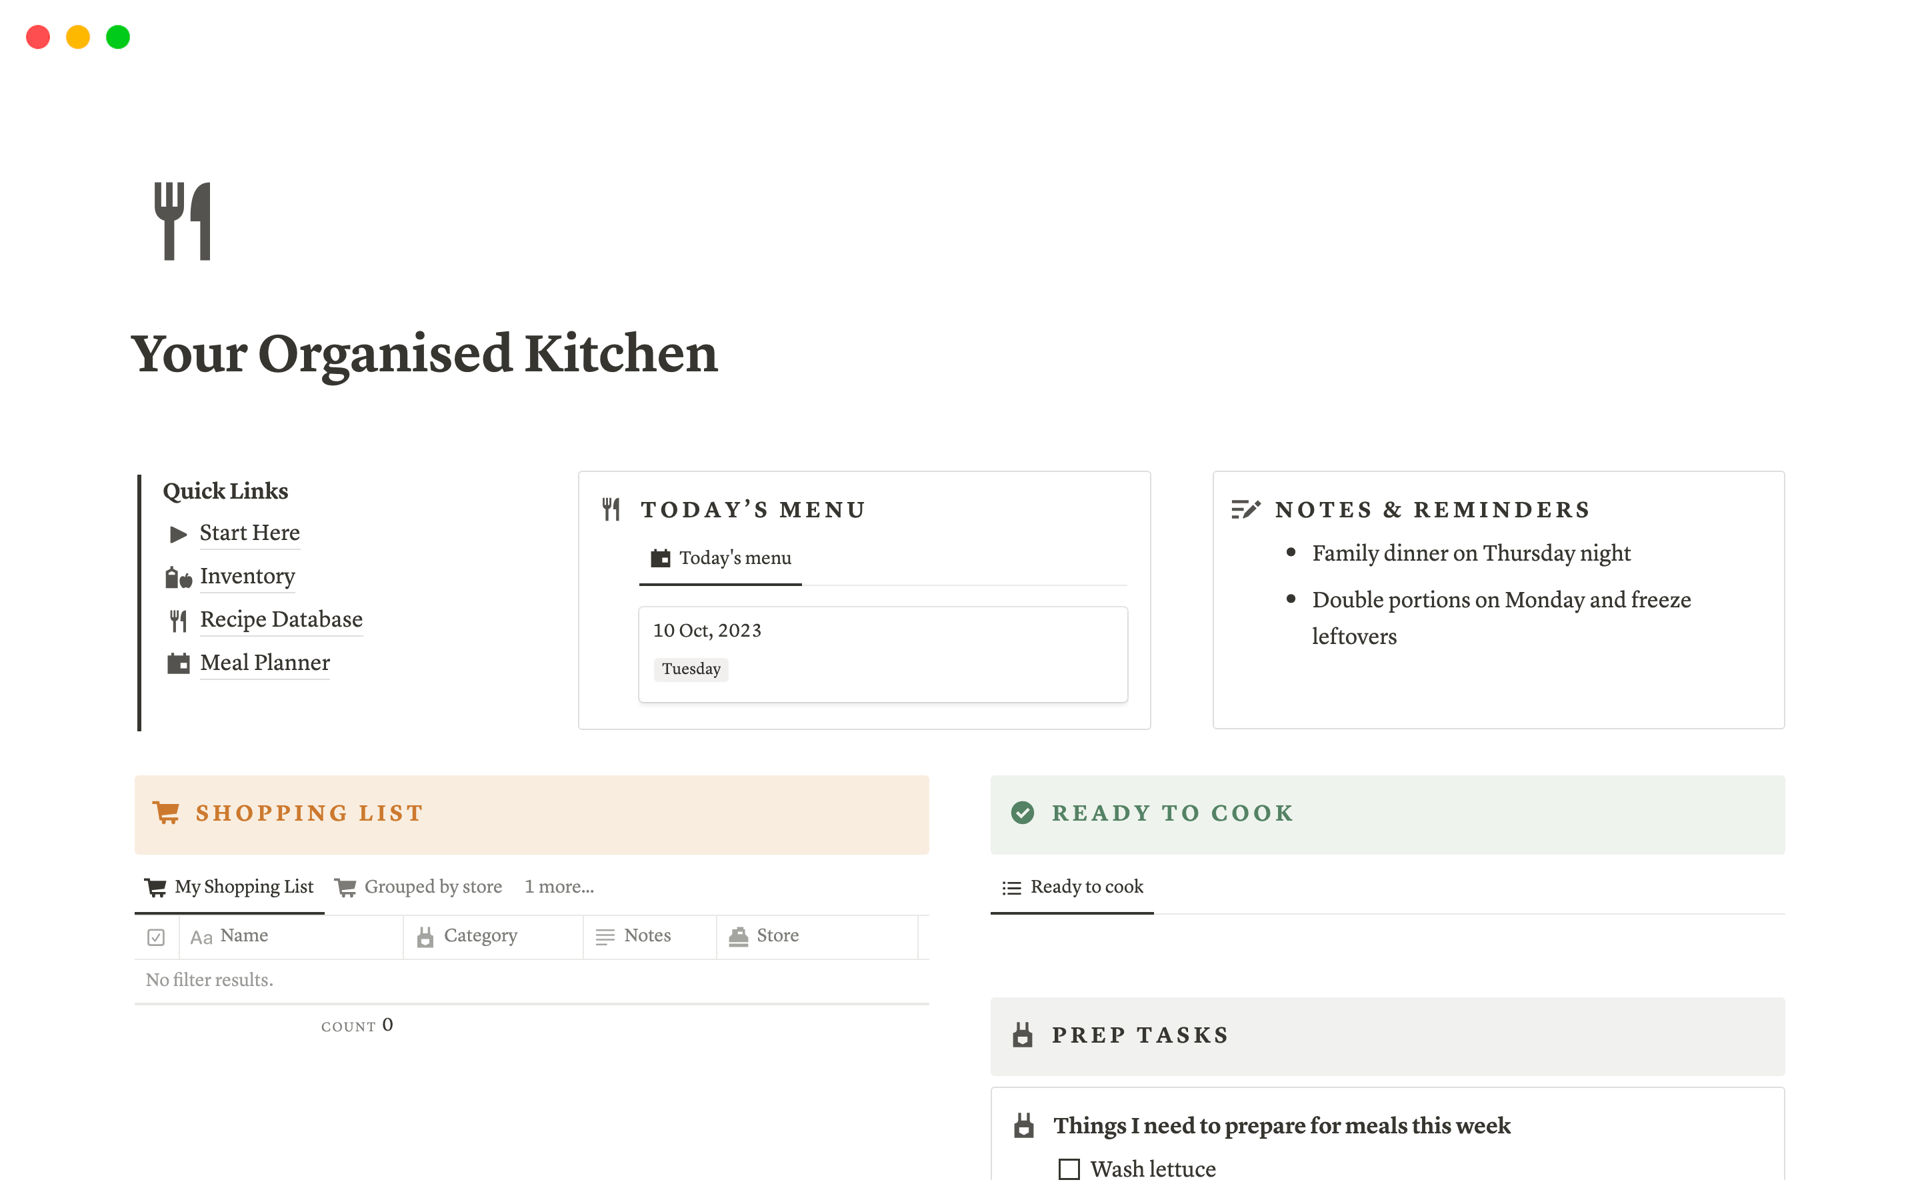 Transform your meal planning and kitchen organisation.